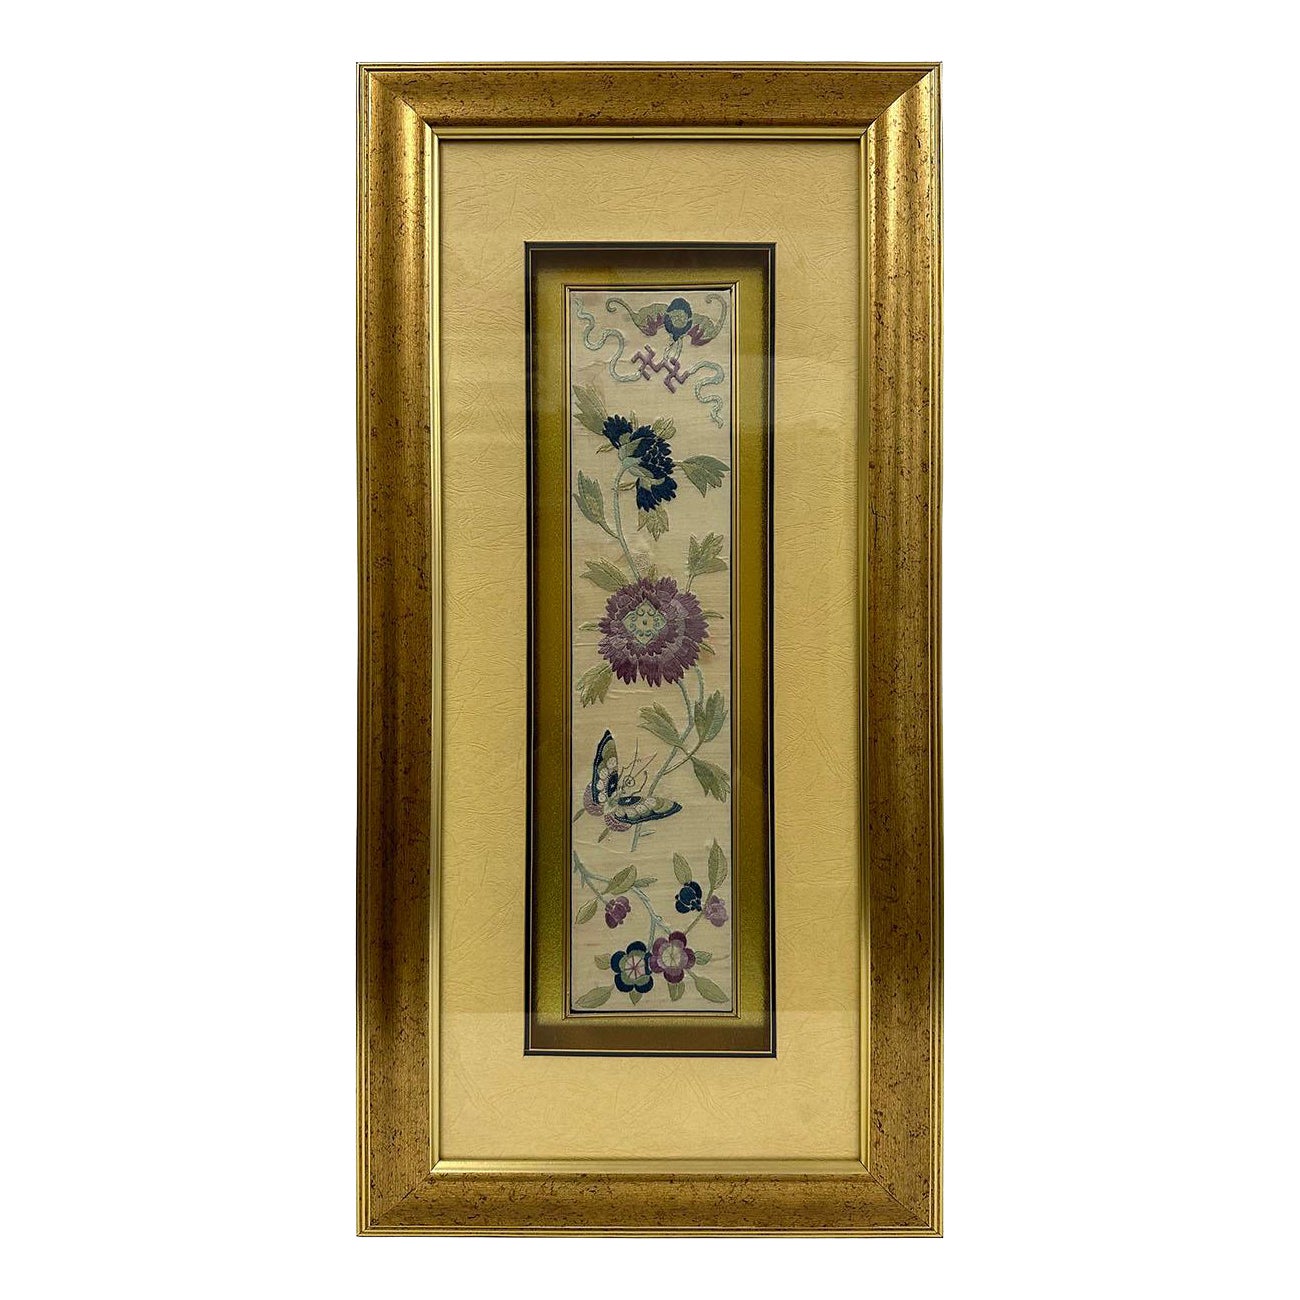 19th Century Antique Chinese Framed Silk Embroidery Panel